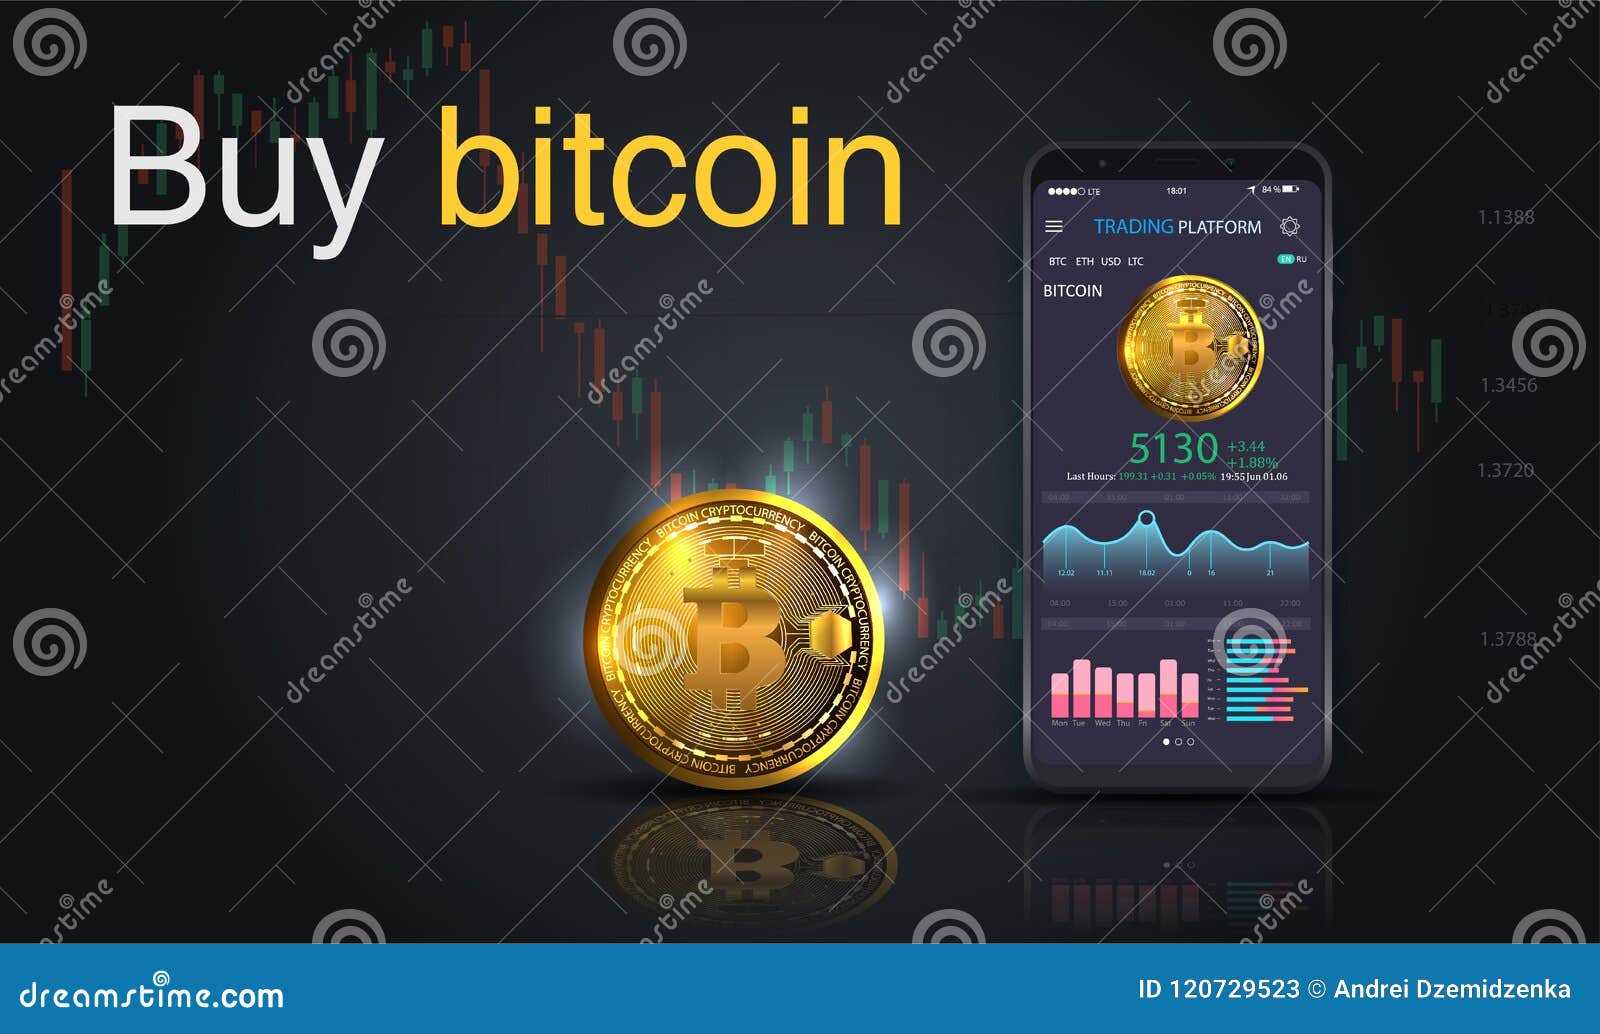 buy bitcoin mobile payment